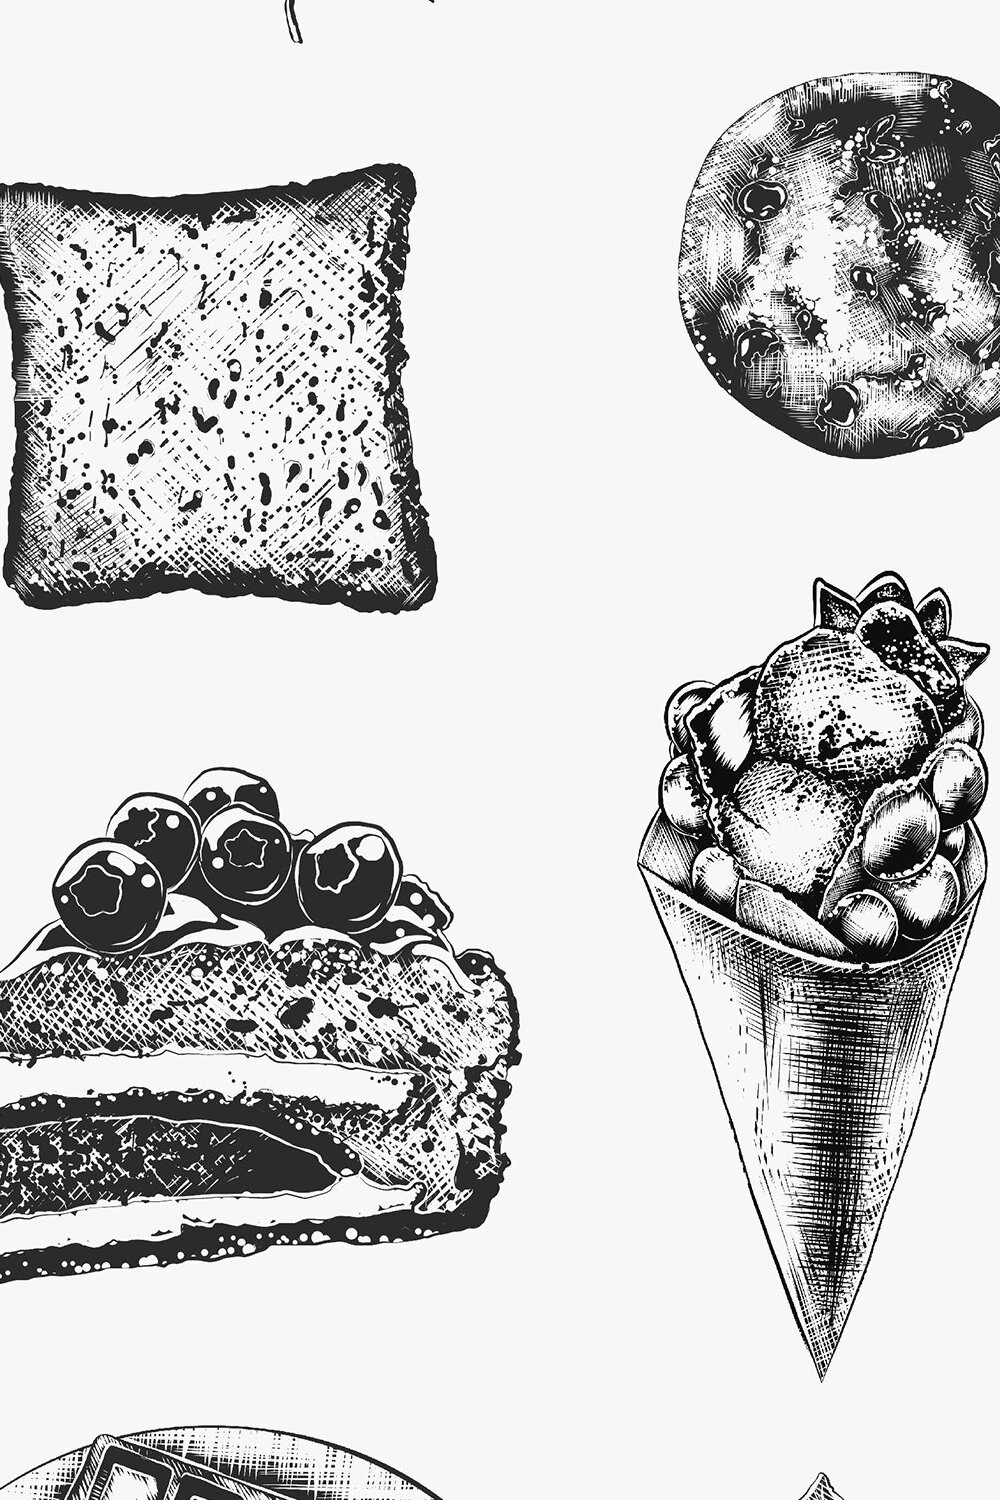 A black and white drawing of different desserts.